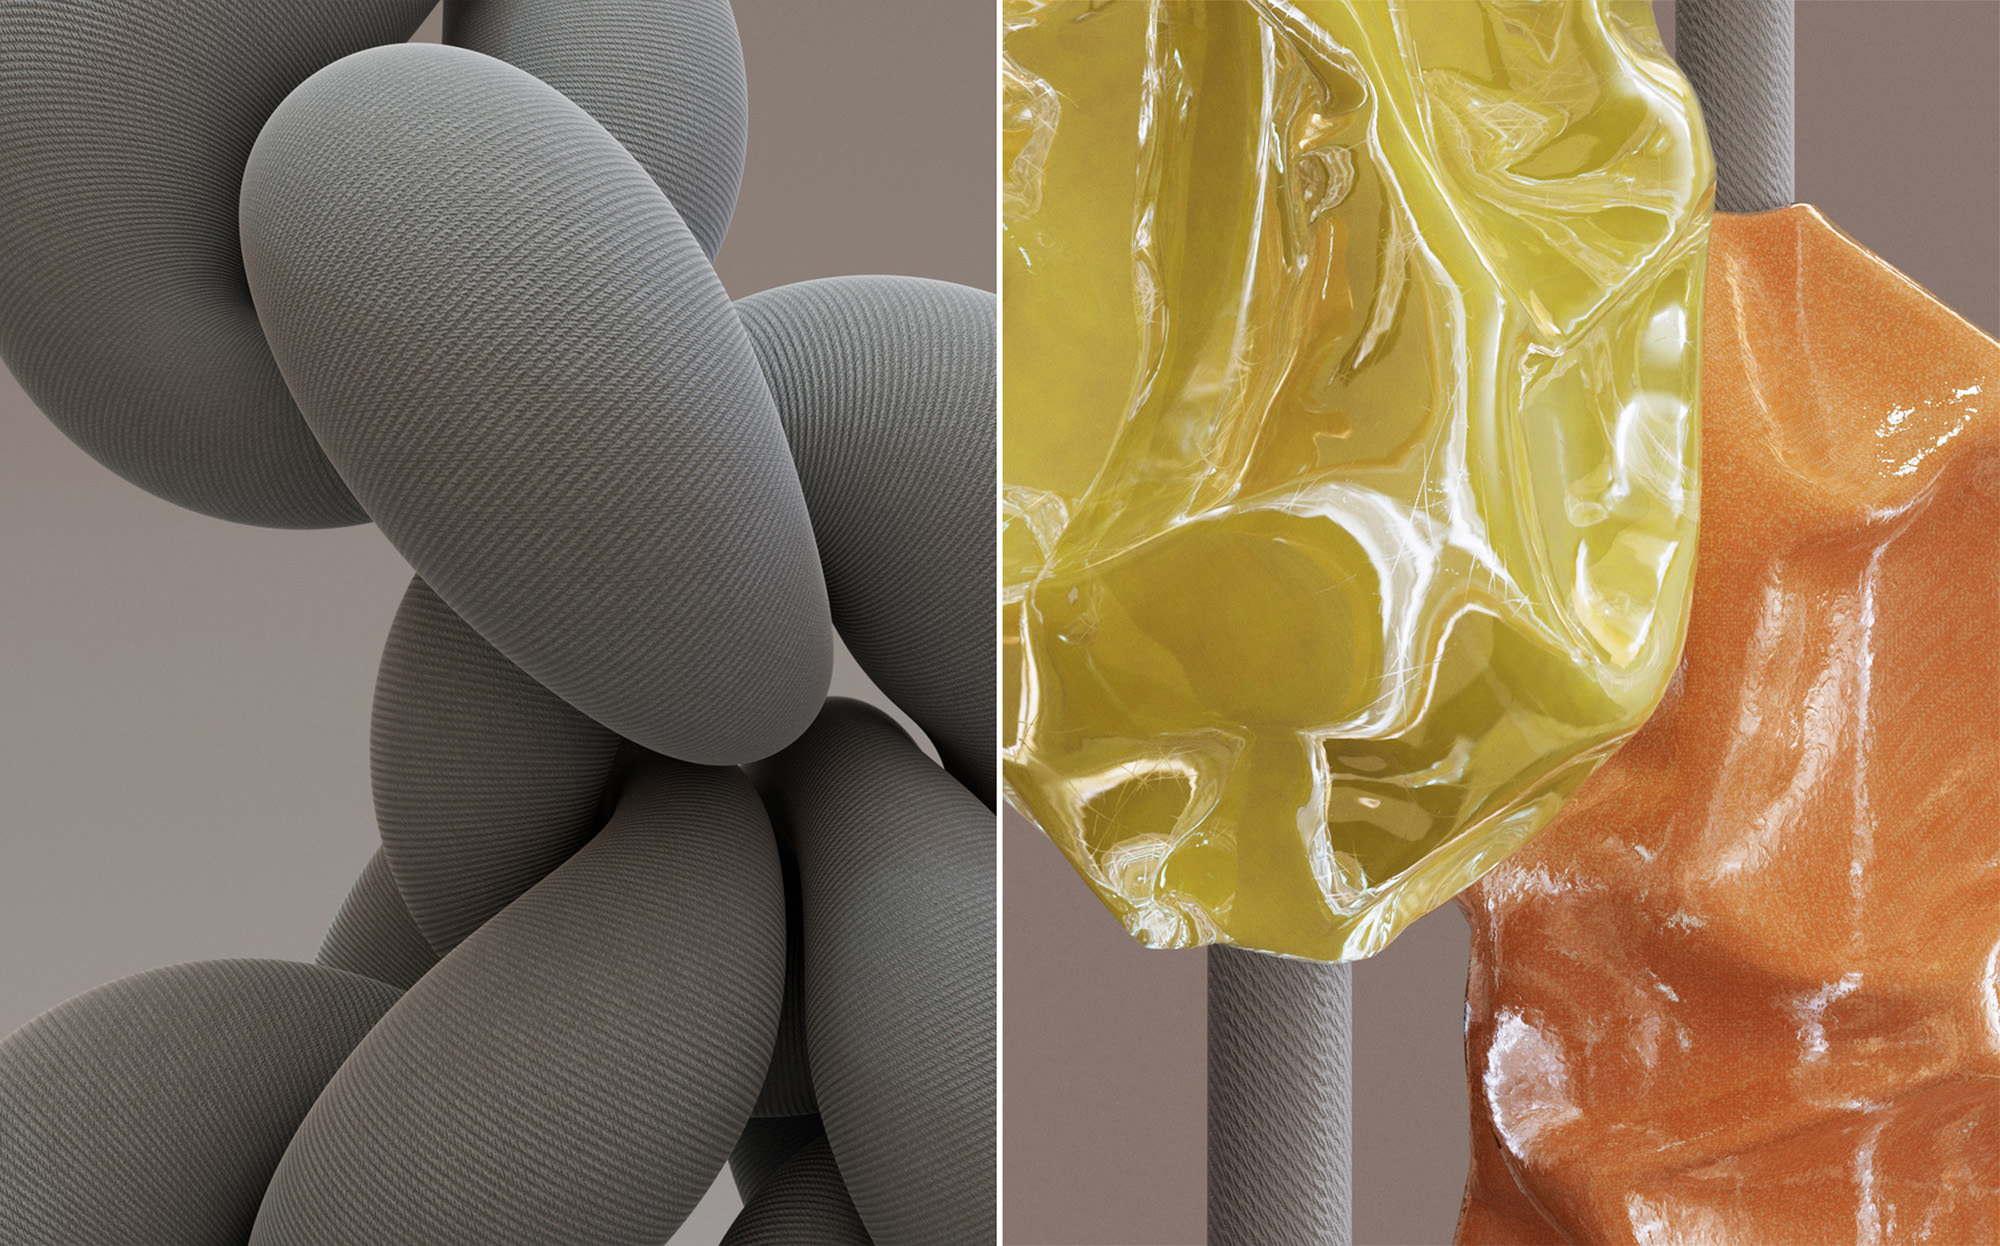 Abstract graphic compositions showing inflated and deflated objects